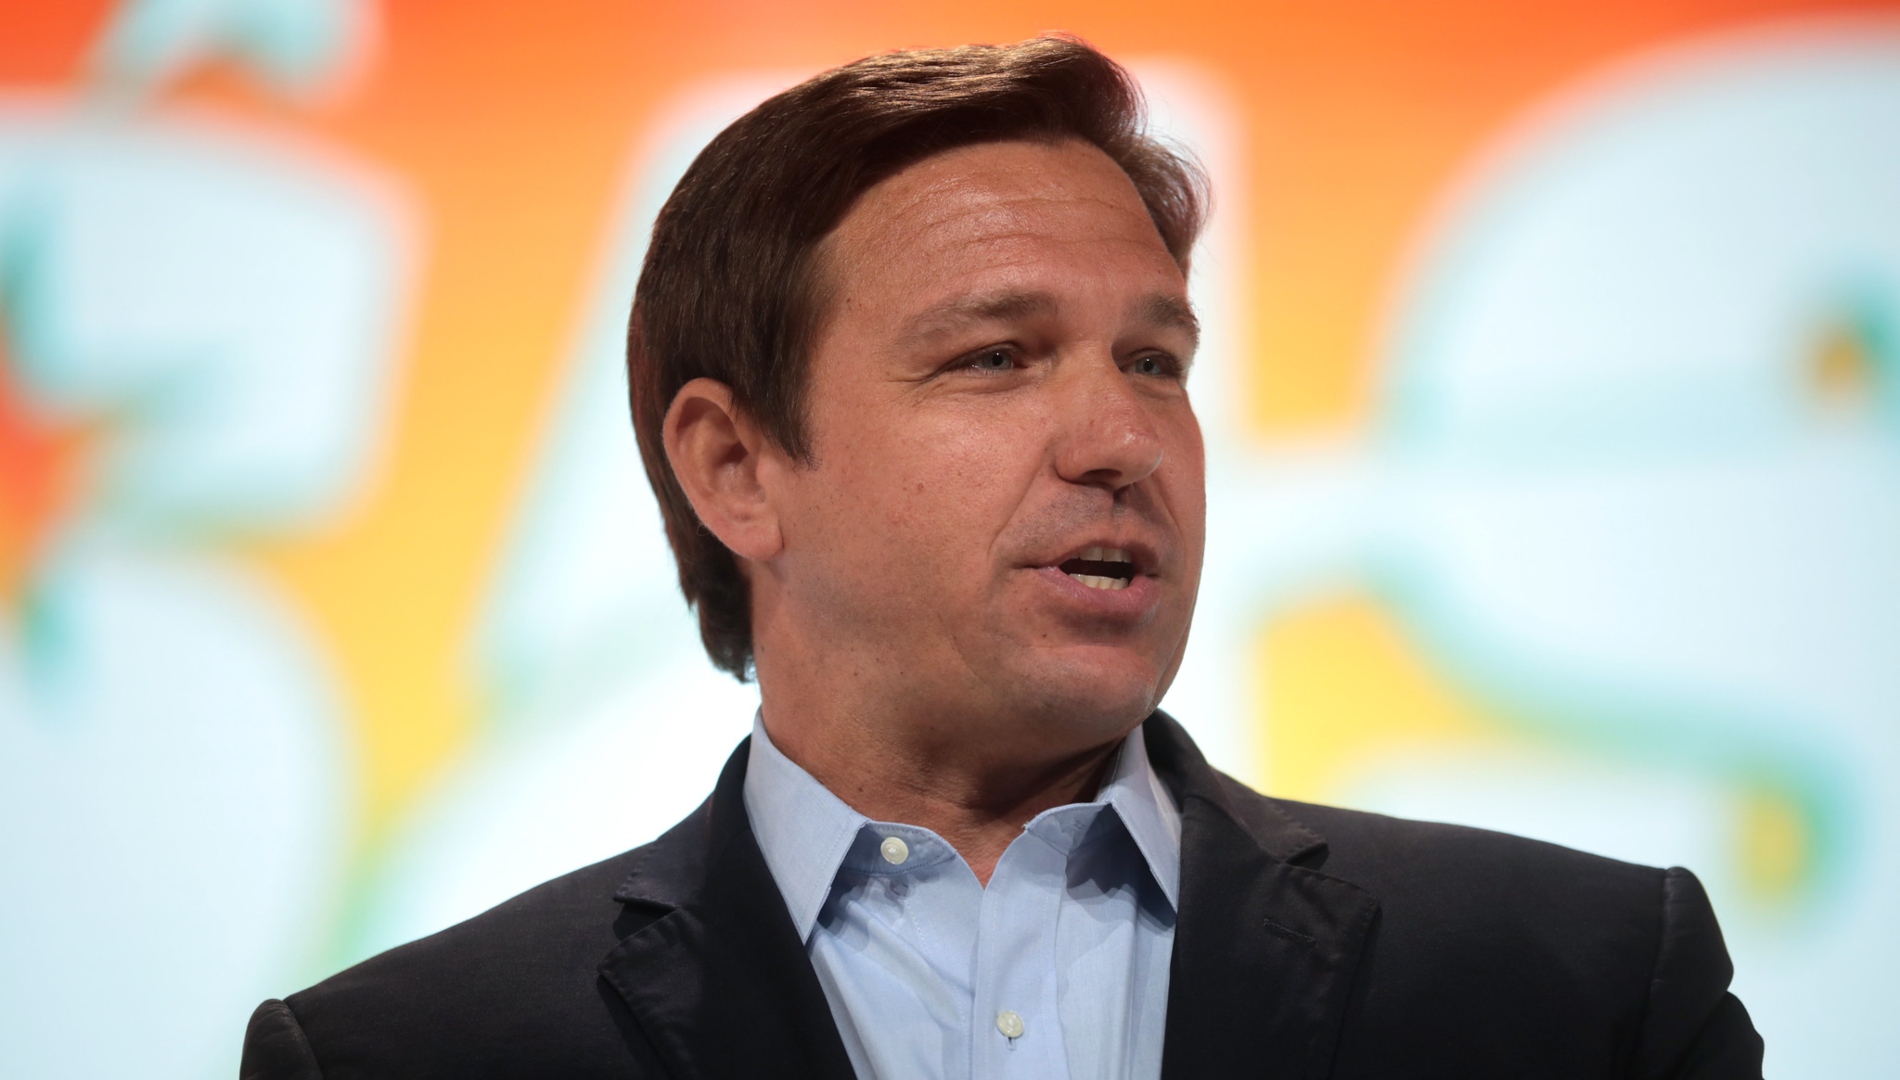 Image: Katie Petrick and David Fiorazo laud Gov. Ron DeSantis for demanding information on diversity initiatives in Florida’s higher education system